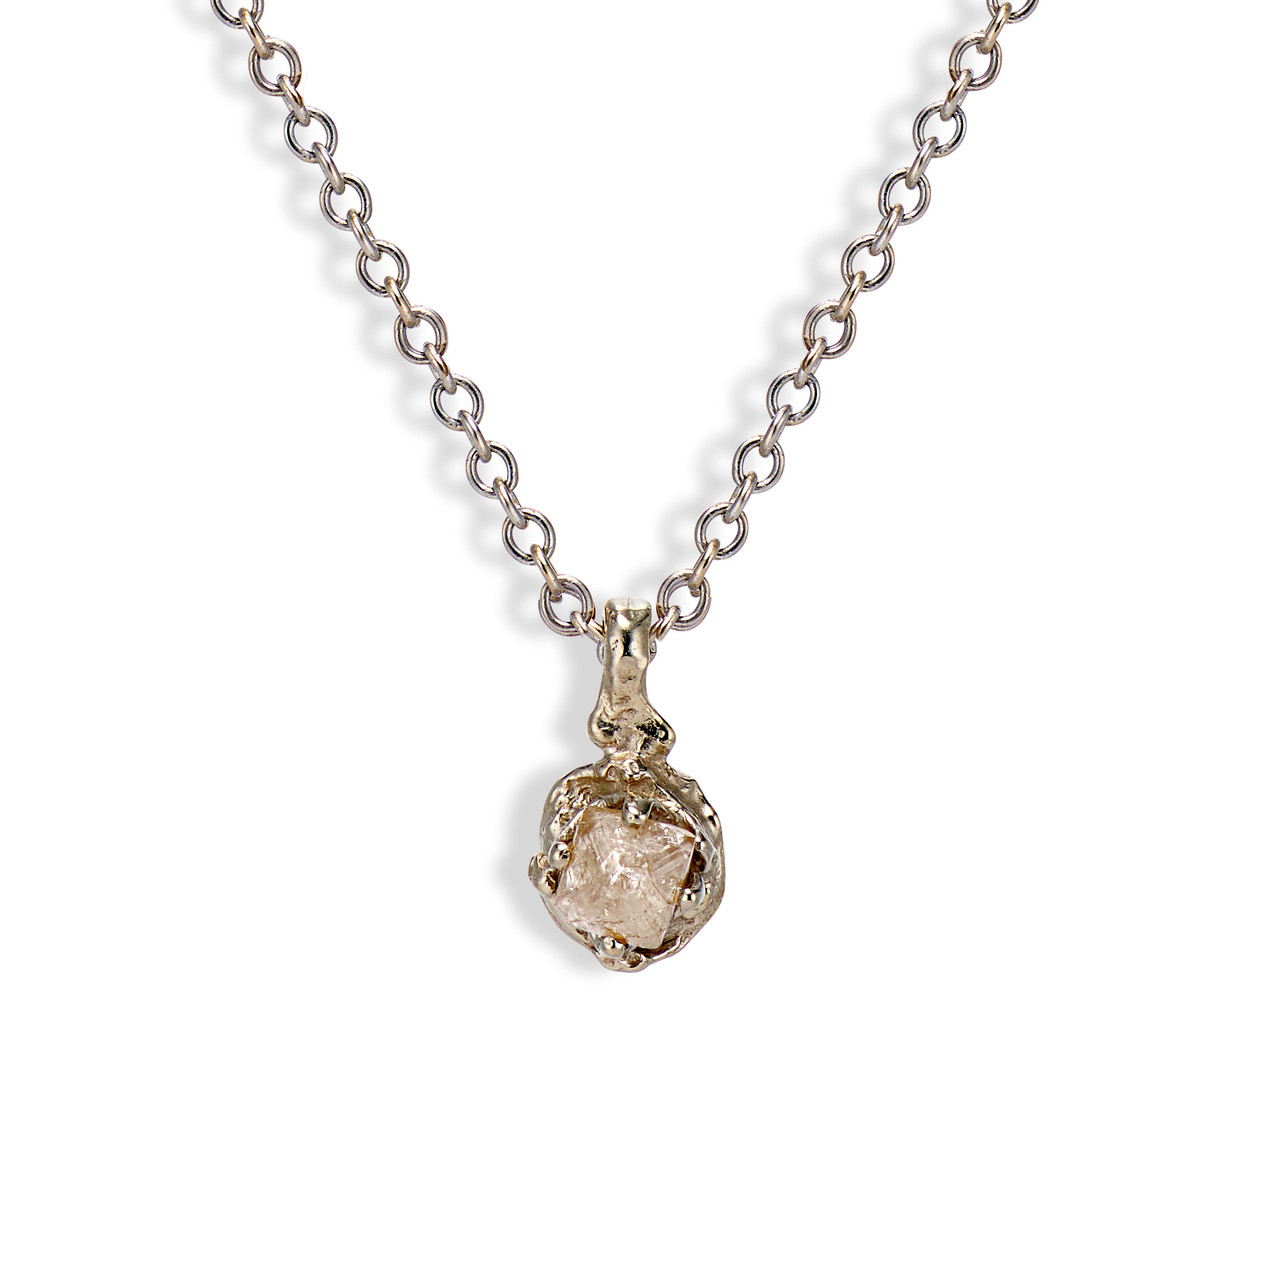 Naples Rough Diamond Necklace with Gold Chain | Olivia Ewing